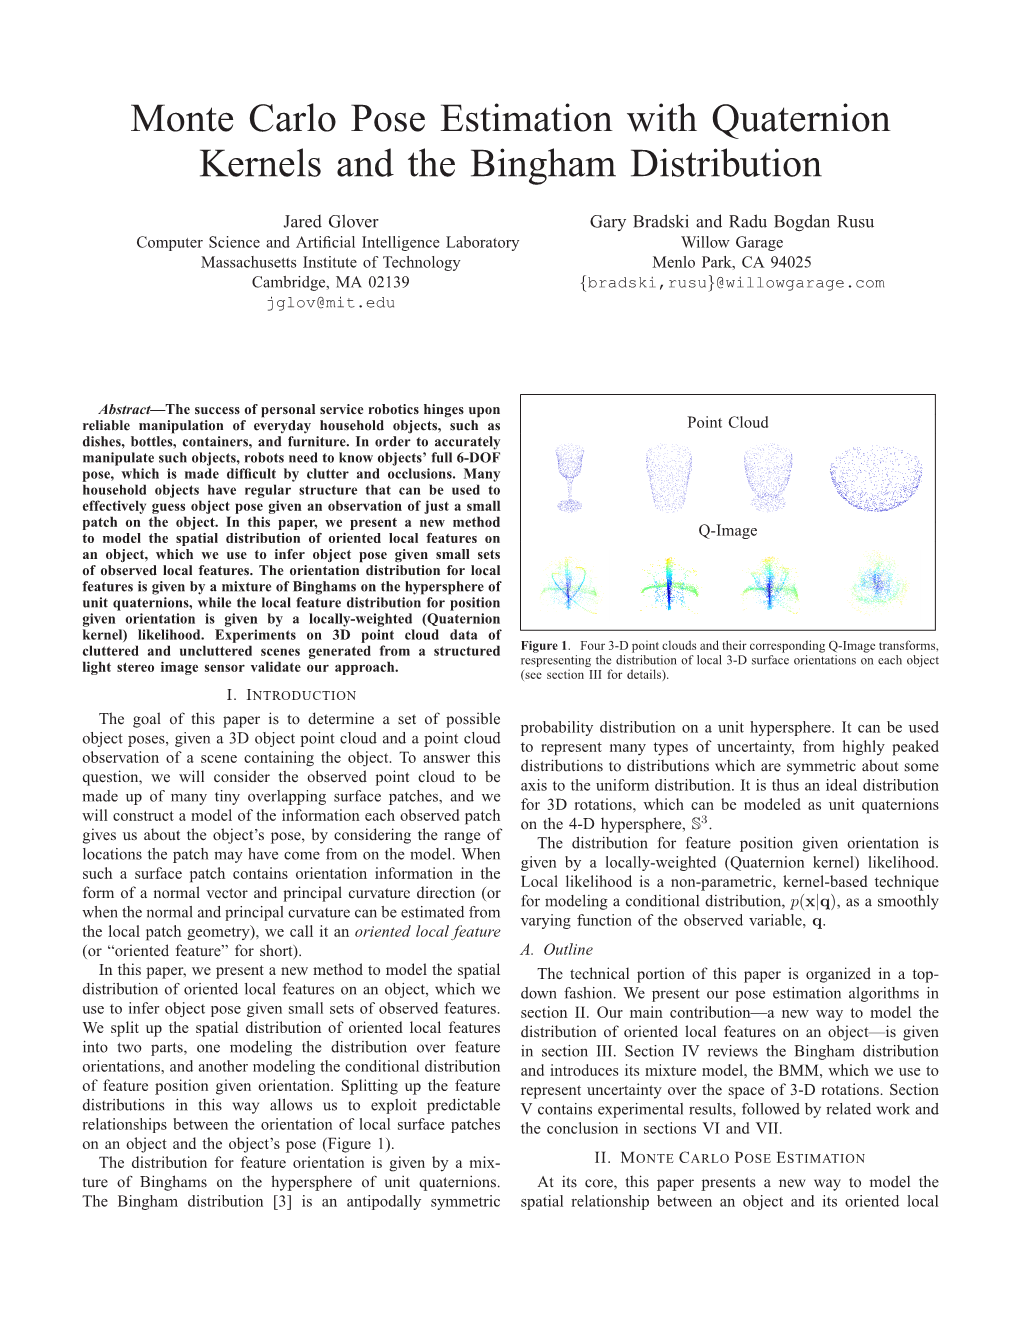 Monte Carlo Pose Estimation with Quaternion Kernels and the Bingham Distribution